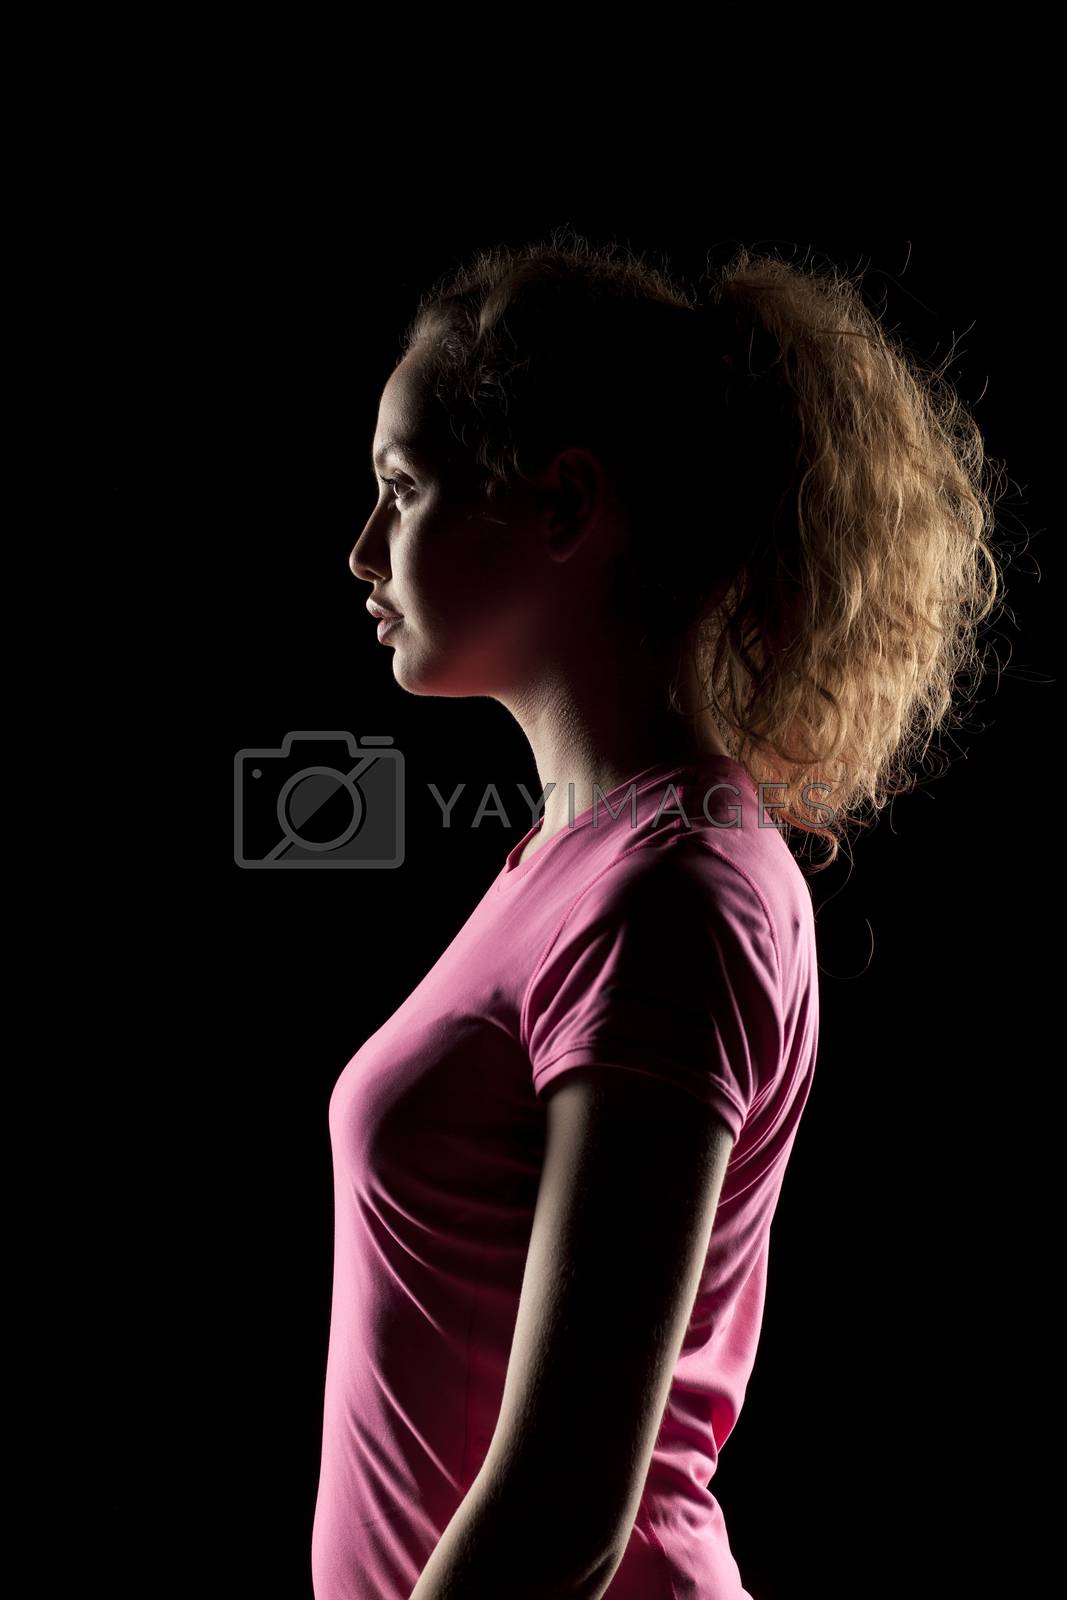 Royalty free image of portrait of a girl with the face in shadow by Vladimirfloyd